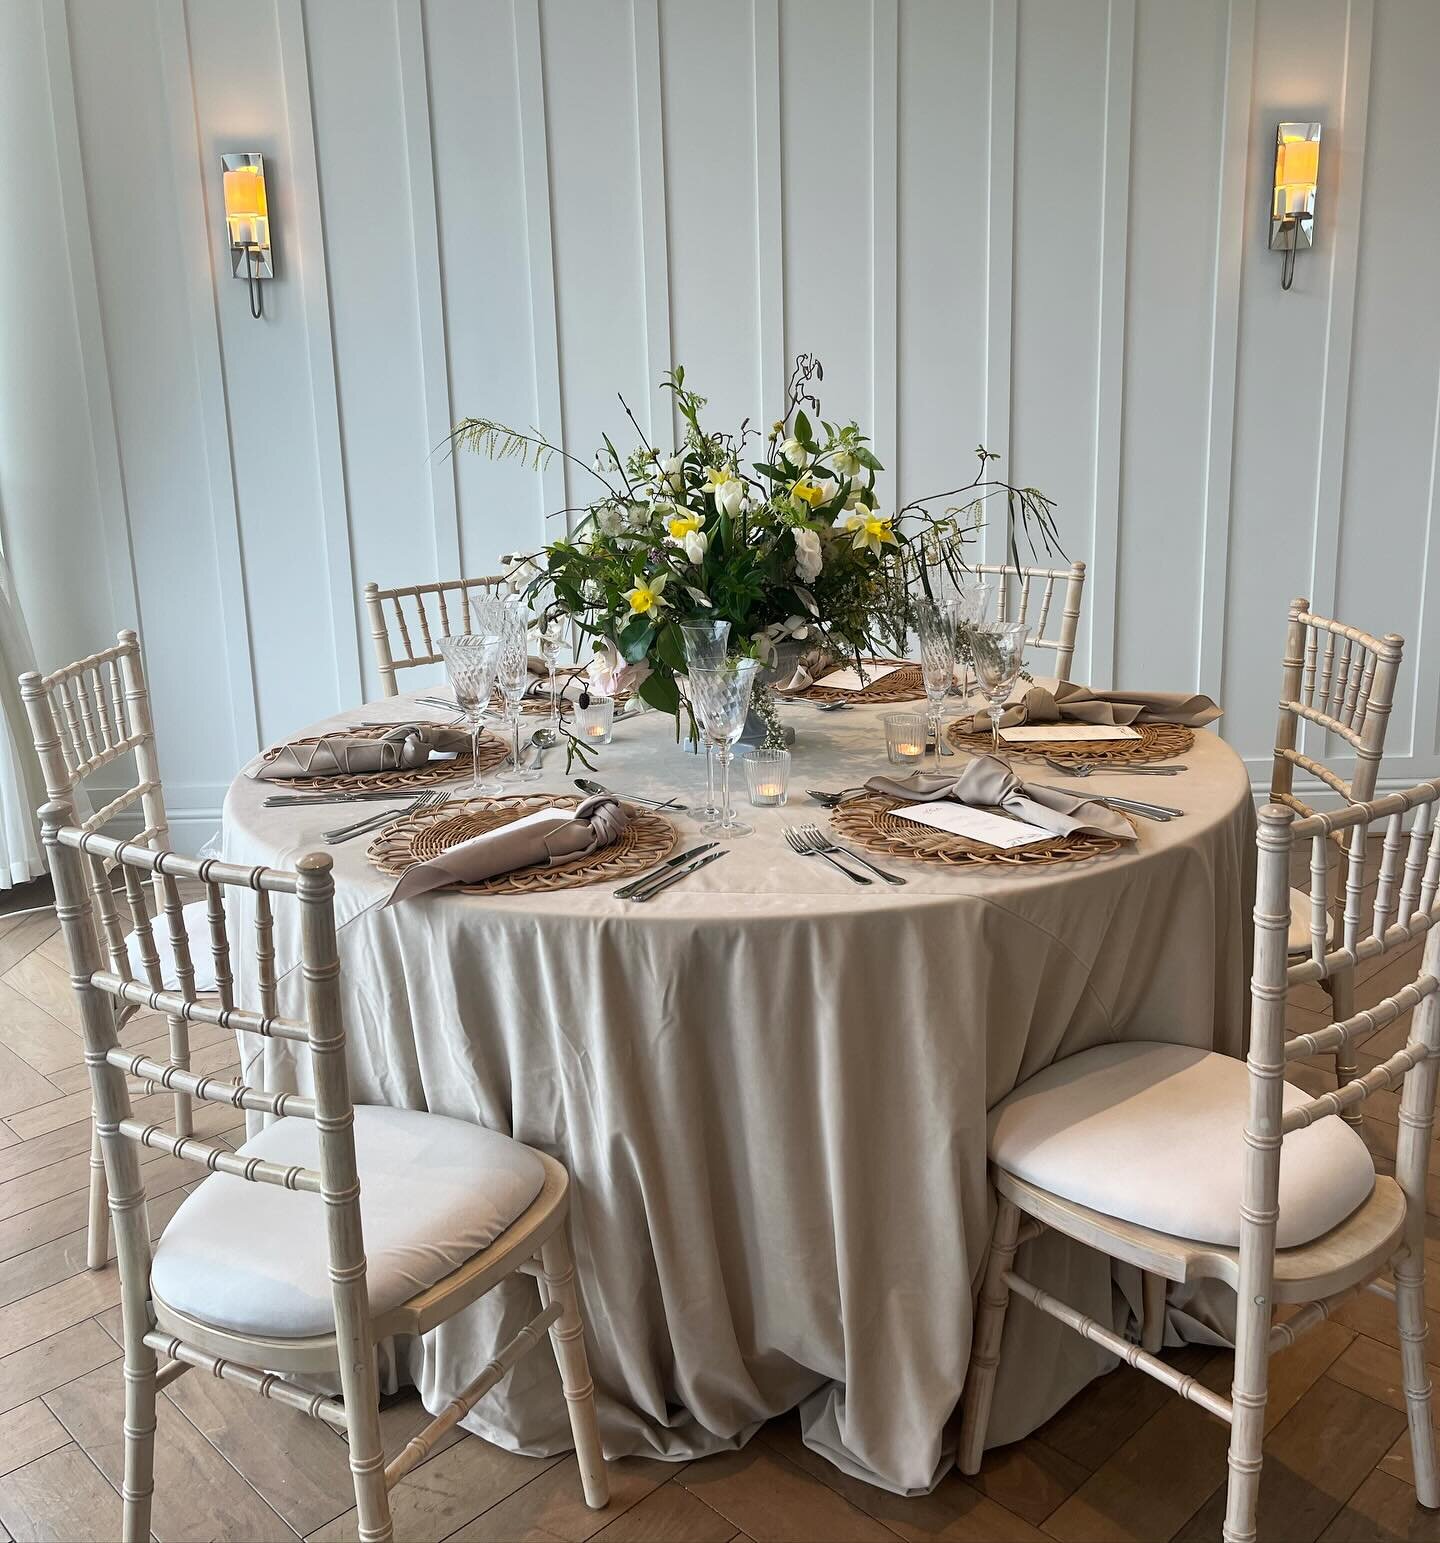 Our set up at @salcombeharbourhotel  for their wedding fair today. Gorgeous spring colours and stunning flowers by @twig_salcombe. We have styled the dressed the table with beautiful velvet table linen in a taupe colour, rattan place mats, swirl glas